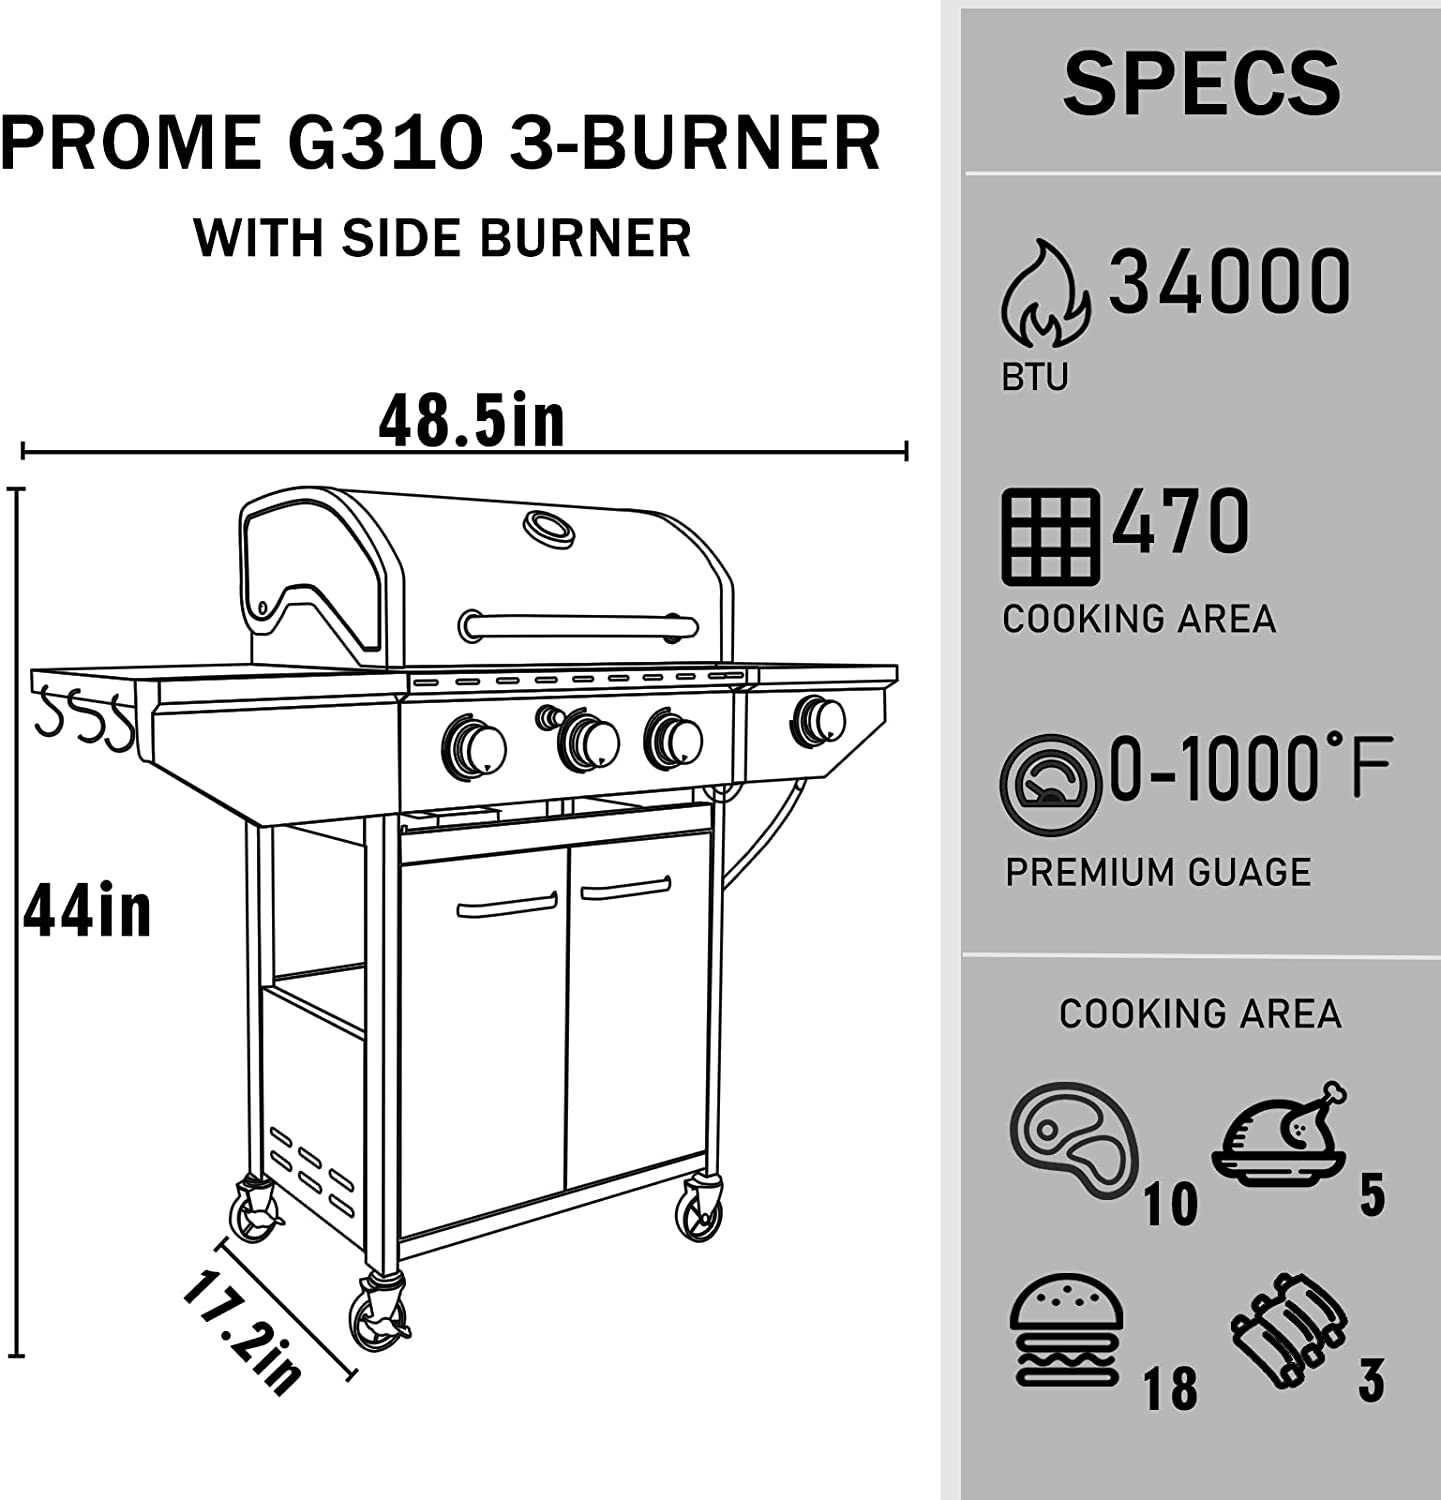 DIMAR GARDEN 3-Burner Propane Gas Grill with Side Burner, Outdoor Cabinet Grill for BBQ, Stainless Steel - image 3 of 9